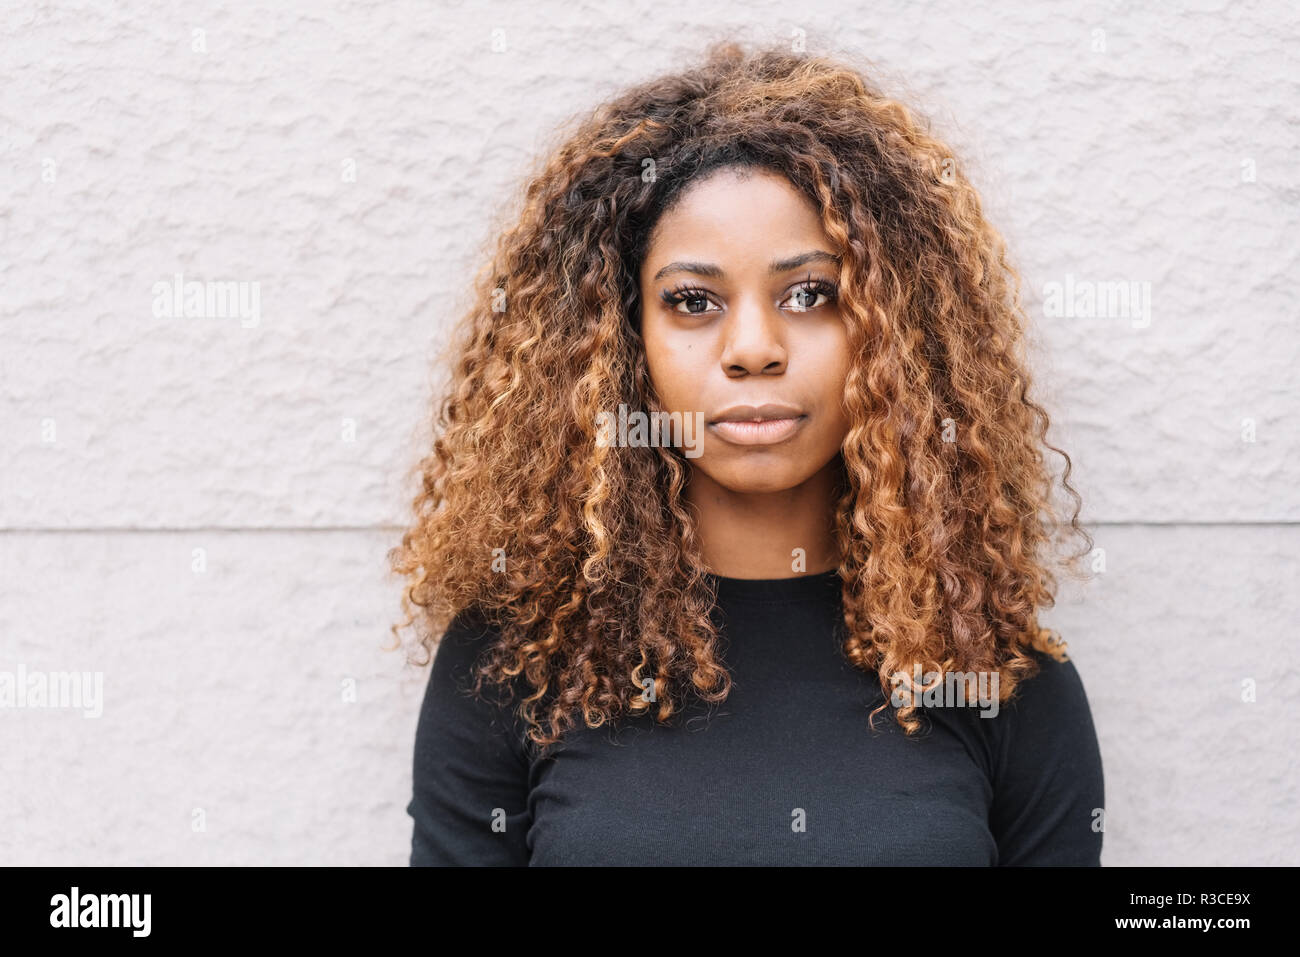 Serious young African woman with gorgeous long curly hair standing against  a rough plaster wall staring at the camera Stock Photo - Alamy